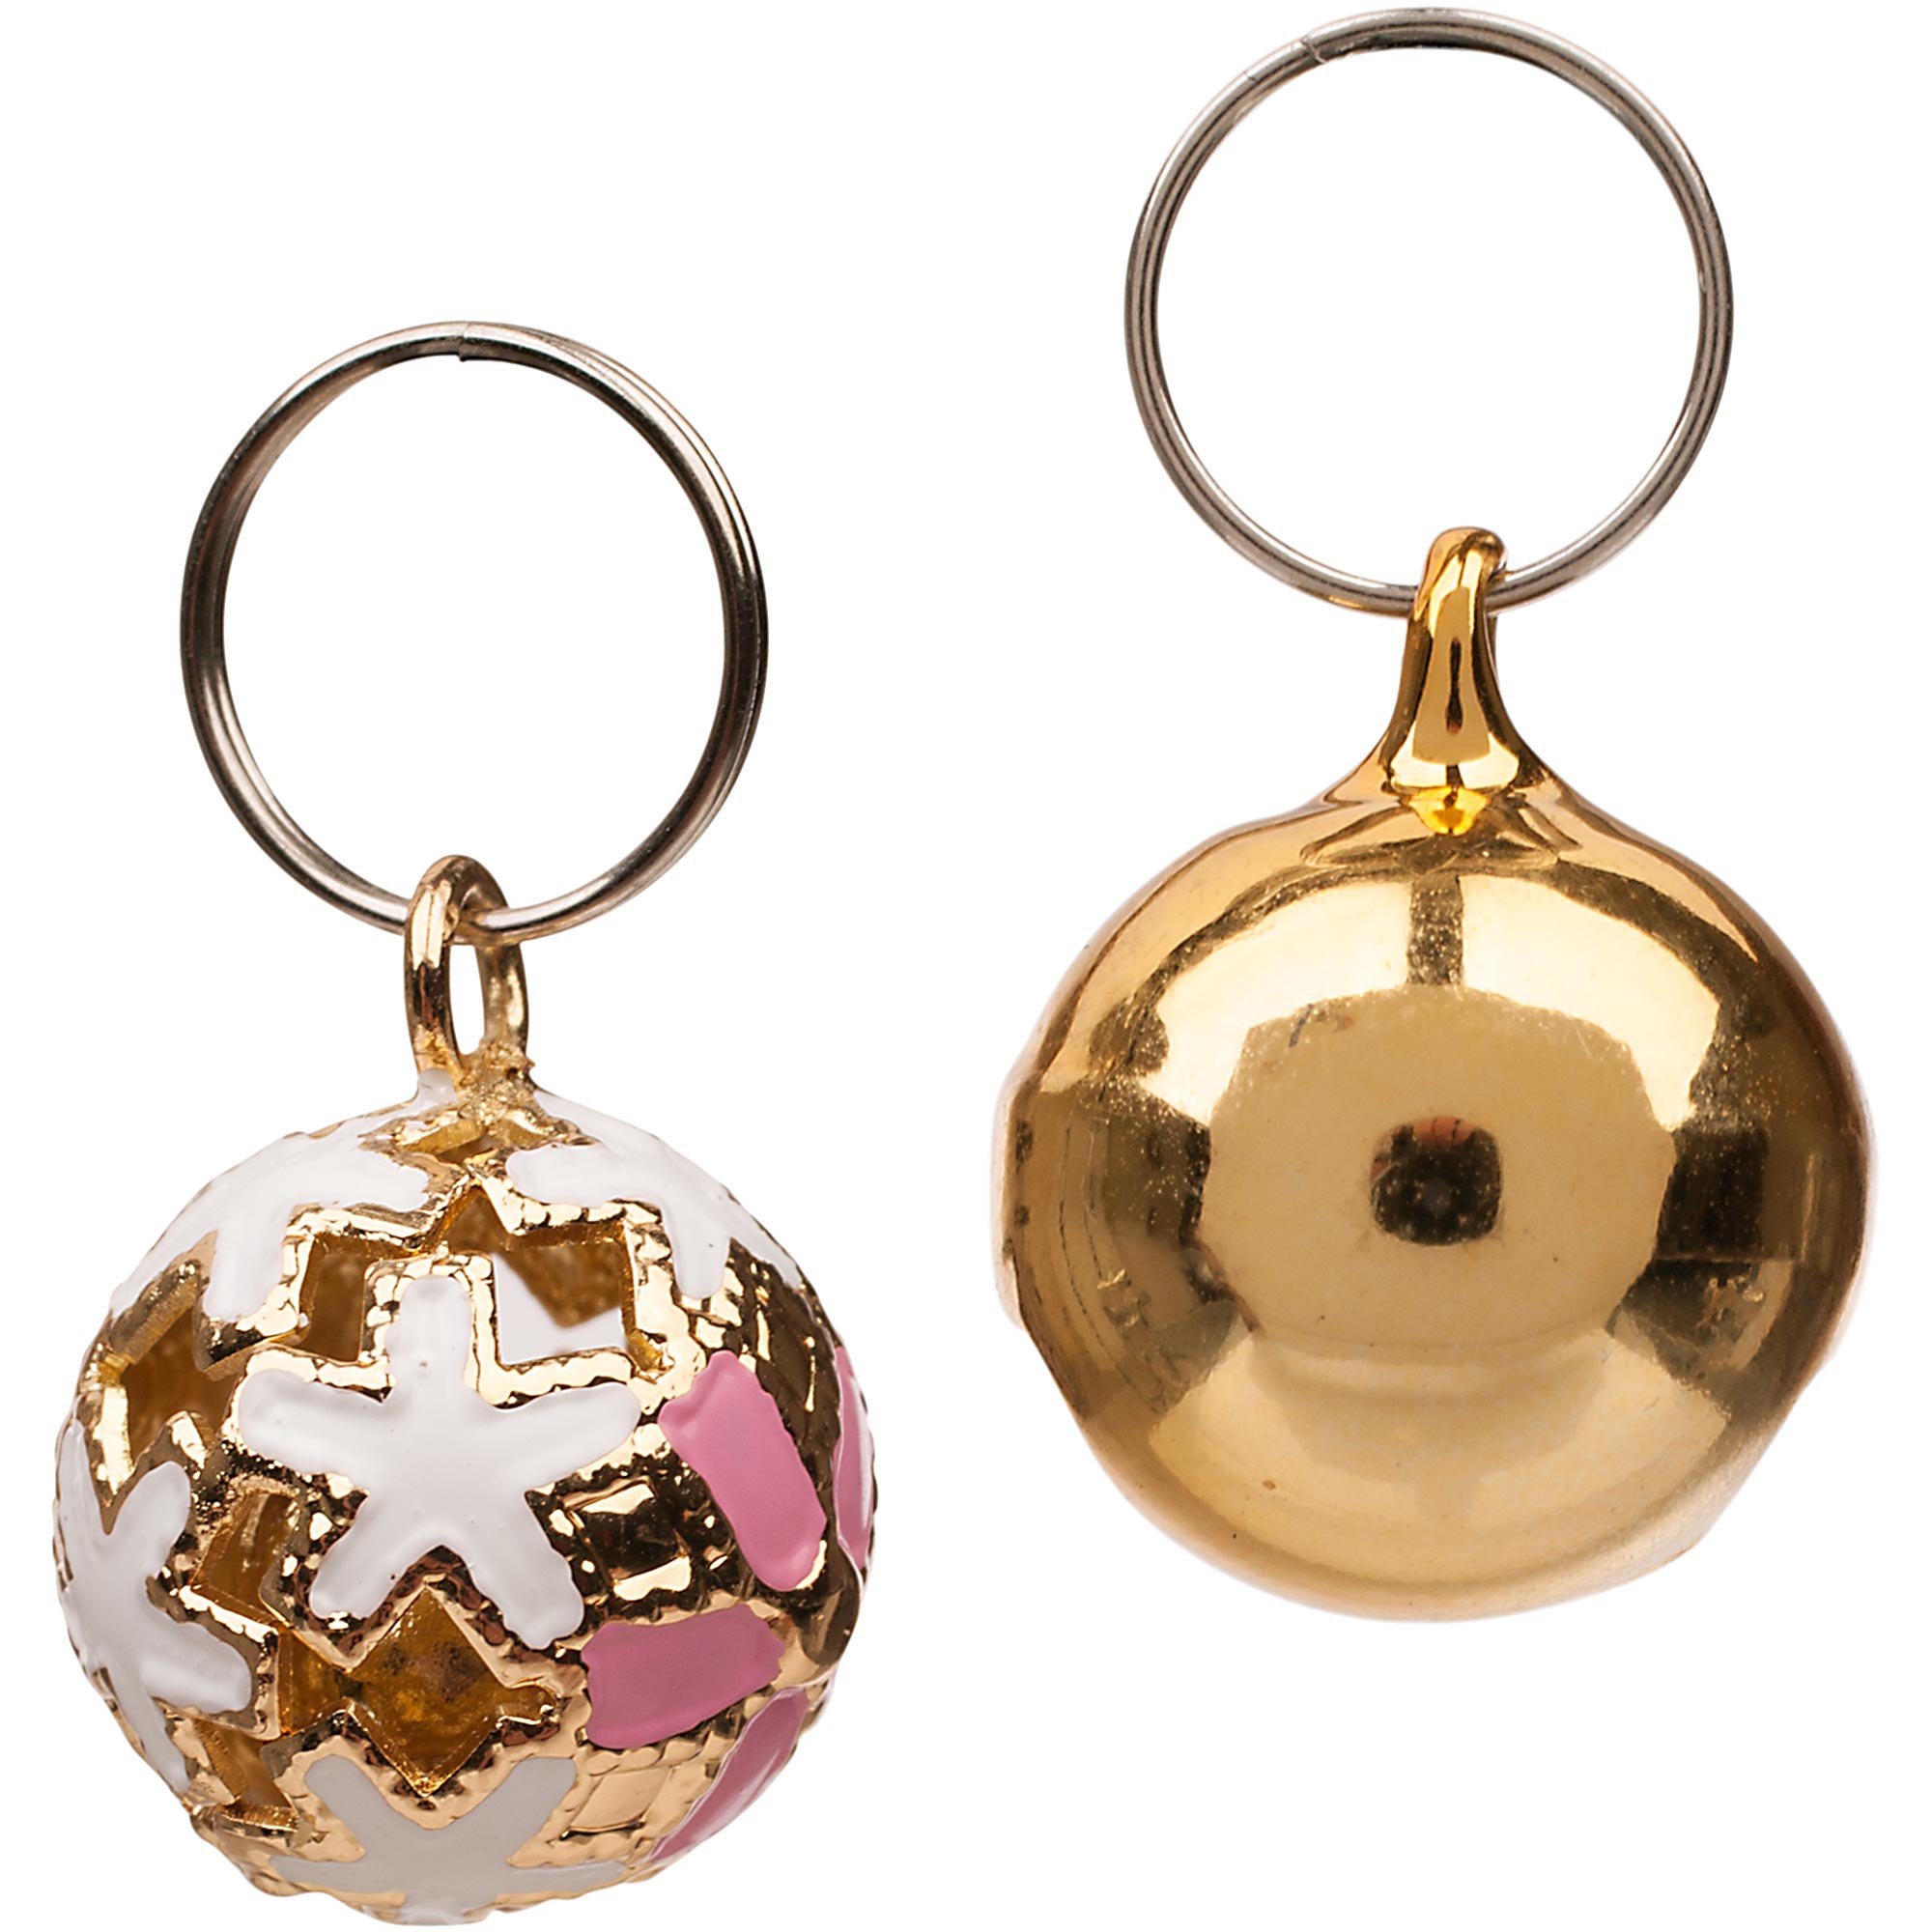 Bond & Co. Two Pack Metallic Collar Bells, Assorted Colors ...